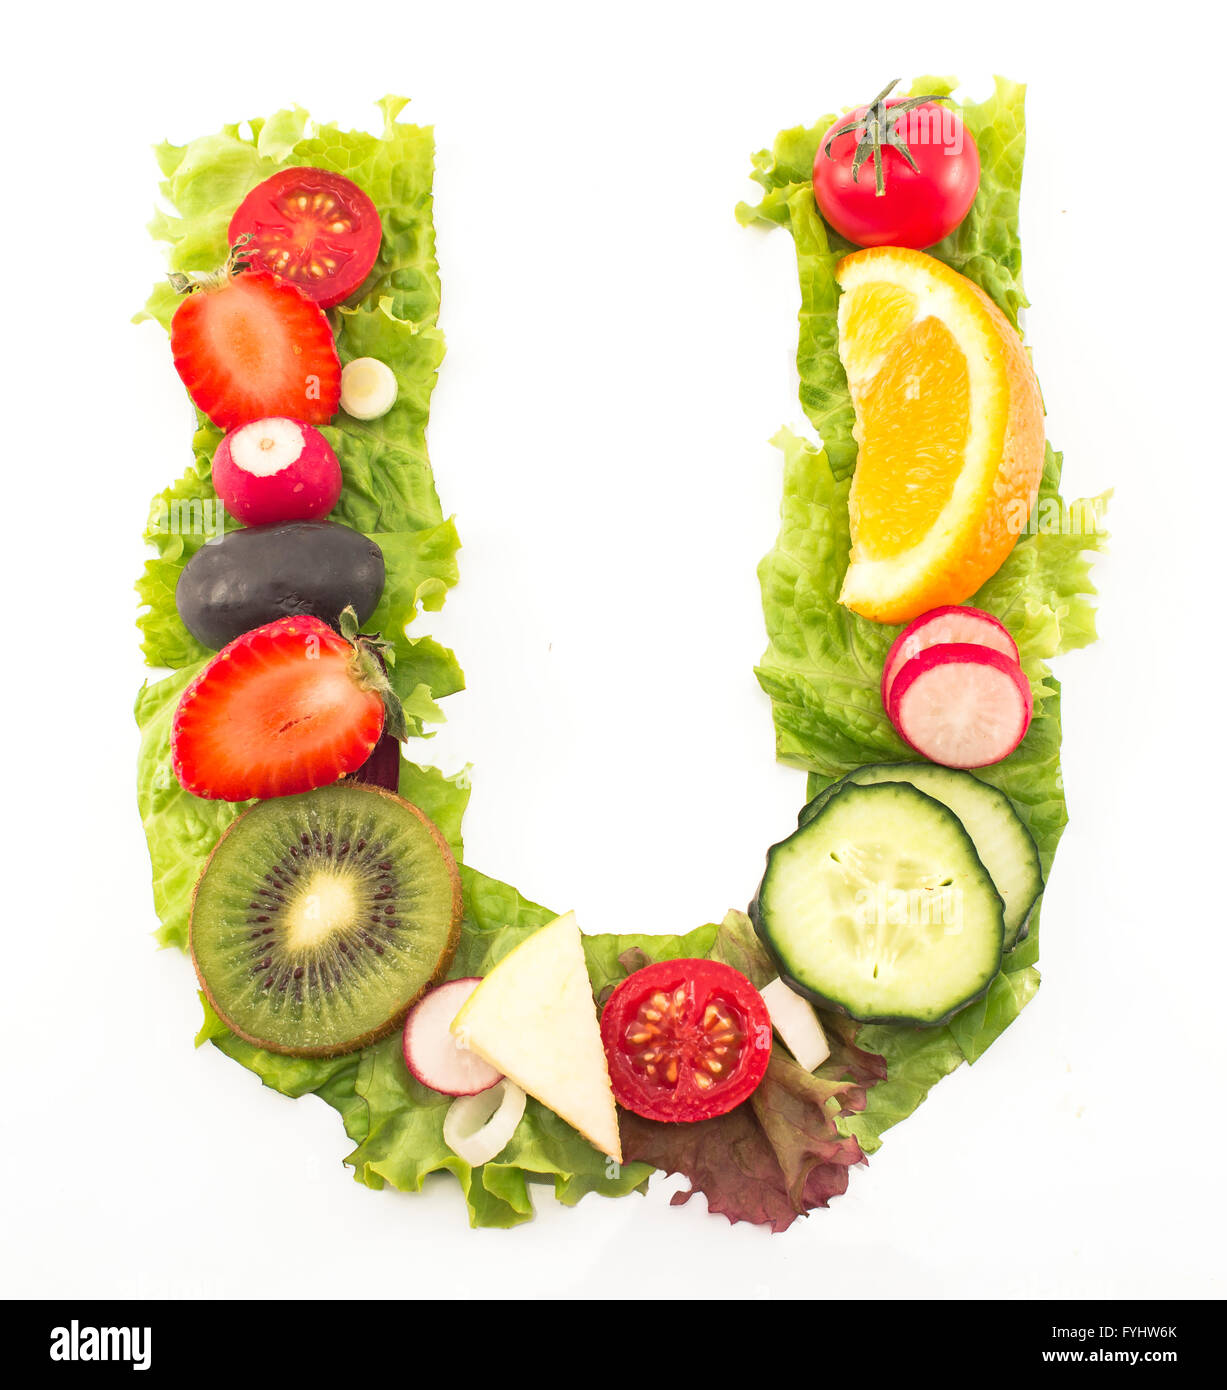 Letter U made of salad and fruits. Stock Photo